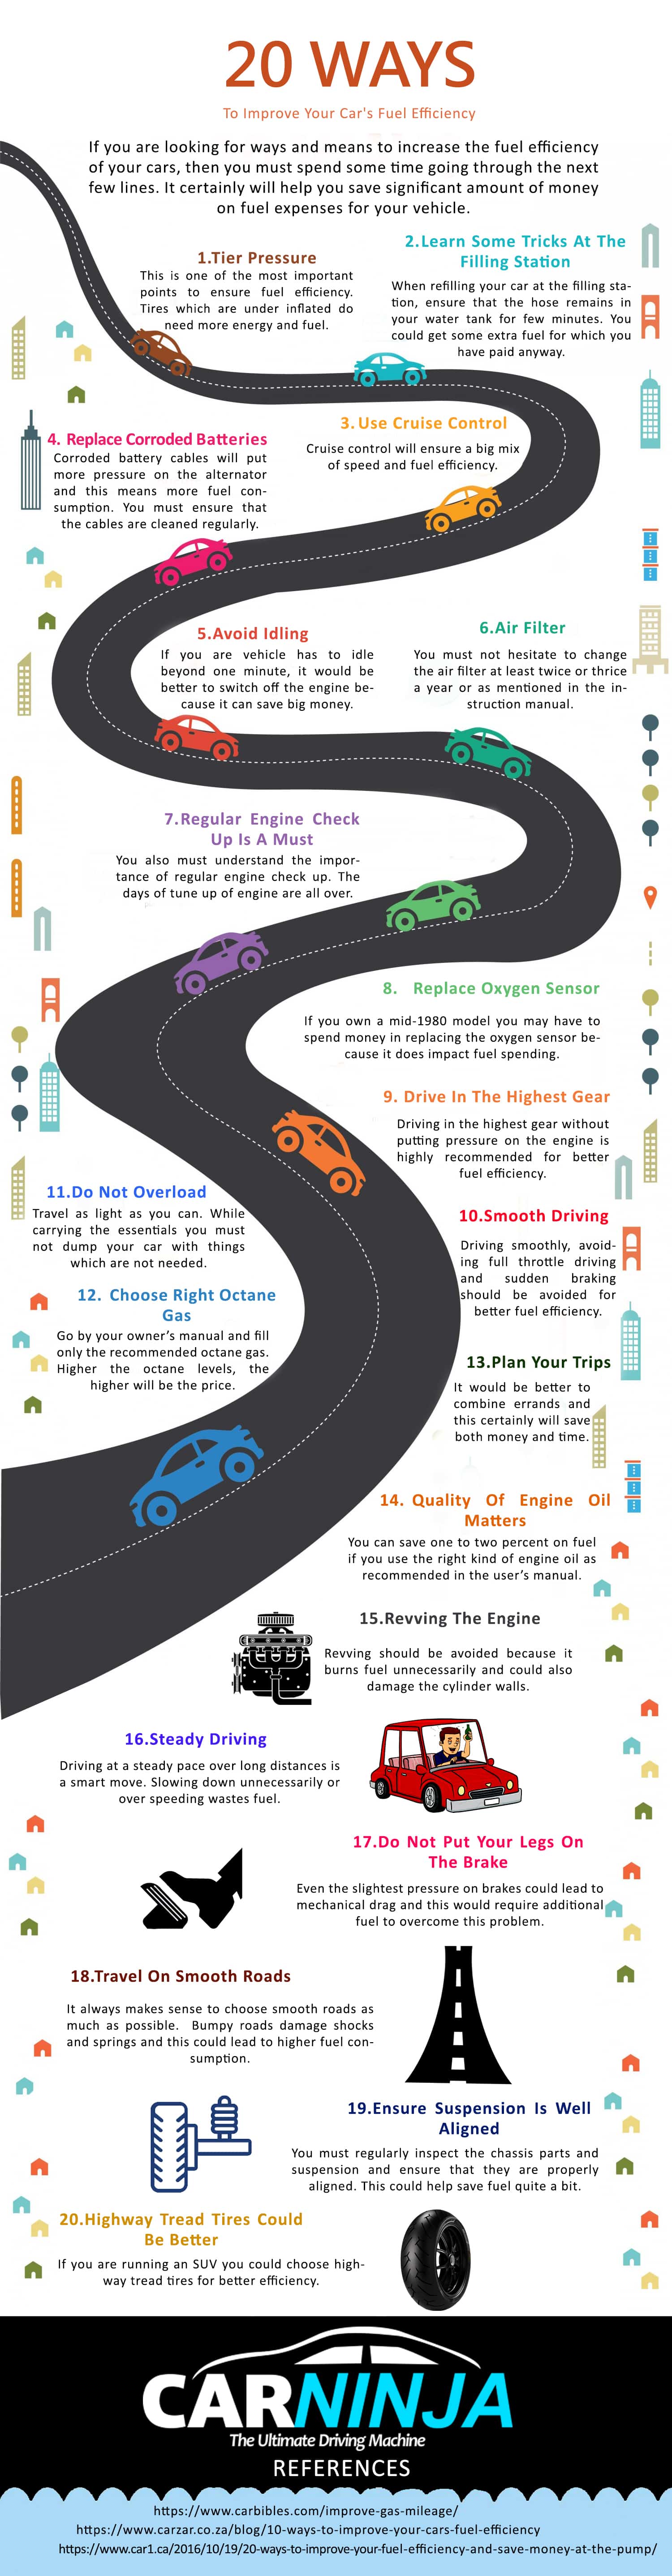 20-ways-to-improve-your-car-s-fuel-efficiency-infographic